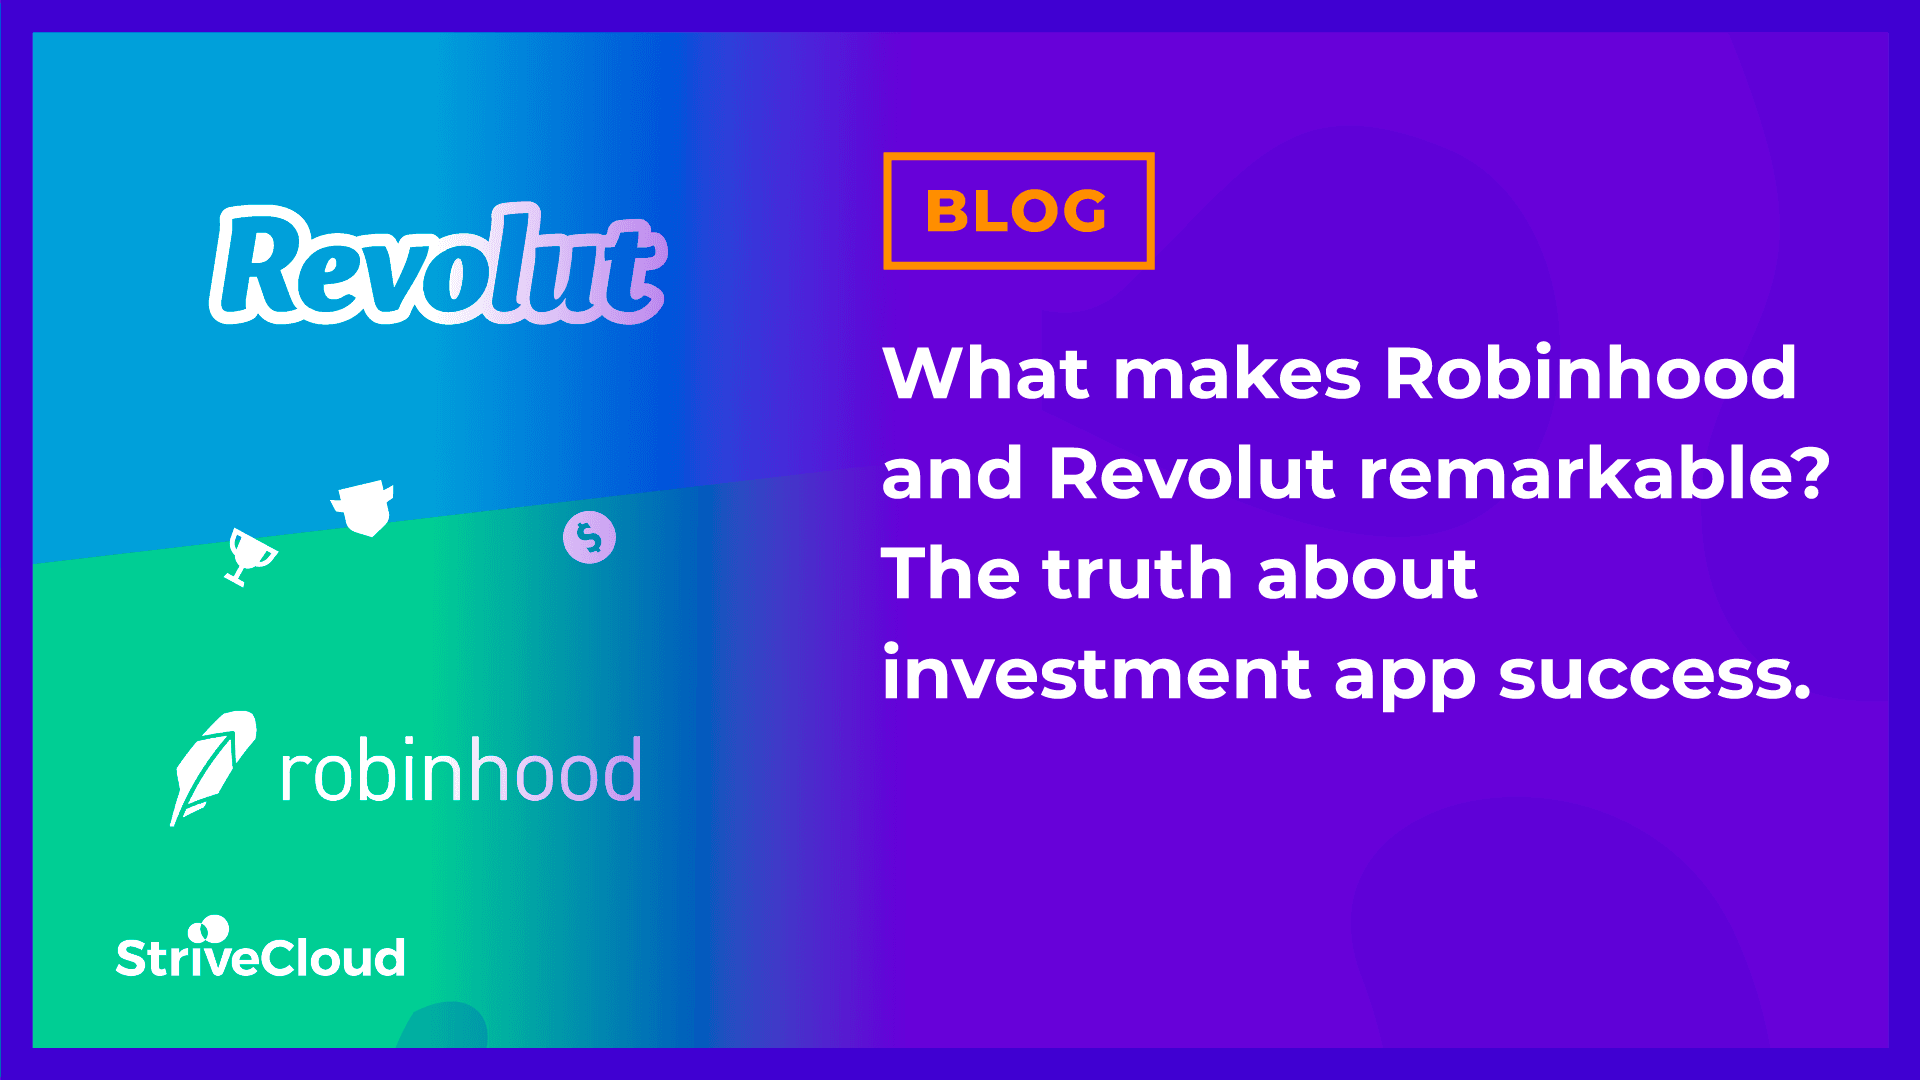 What makes Robinhood and Revolut remarkable? The truth about investment app success.